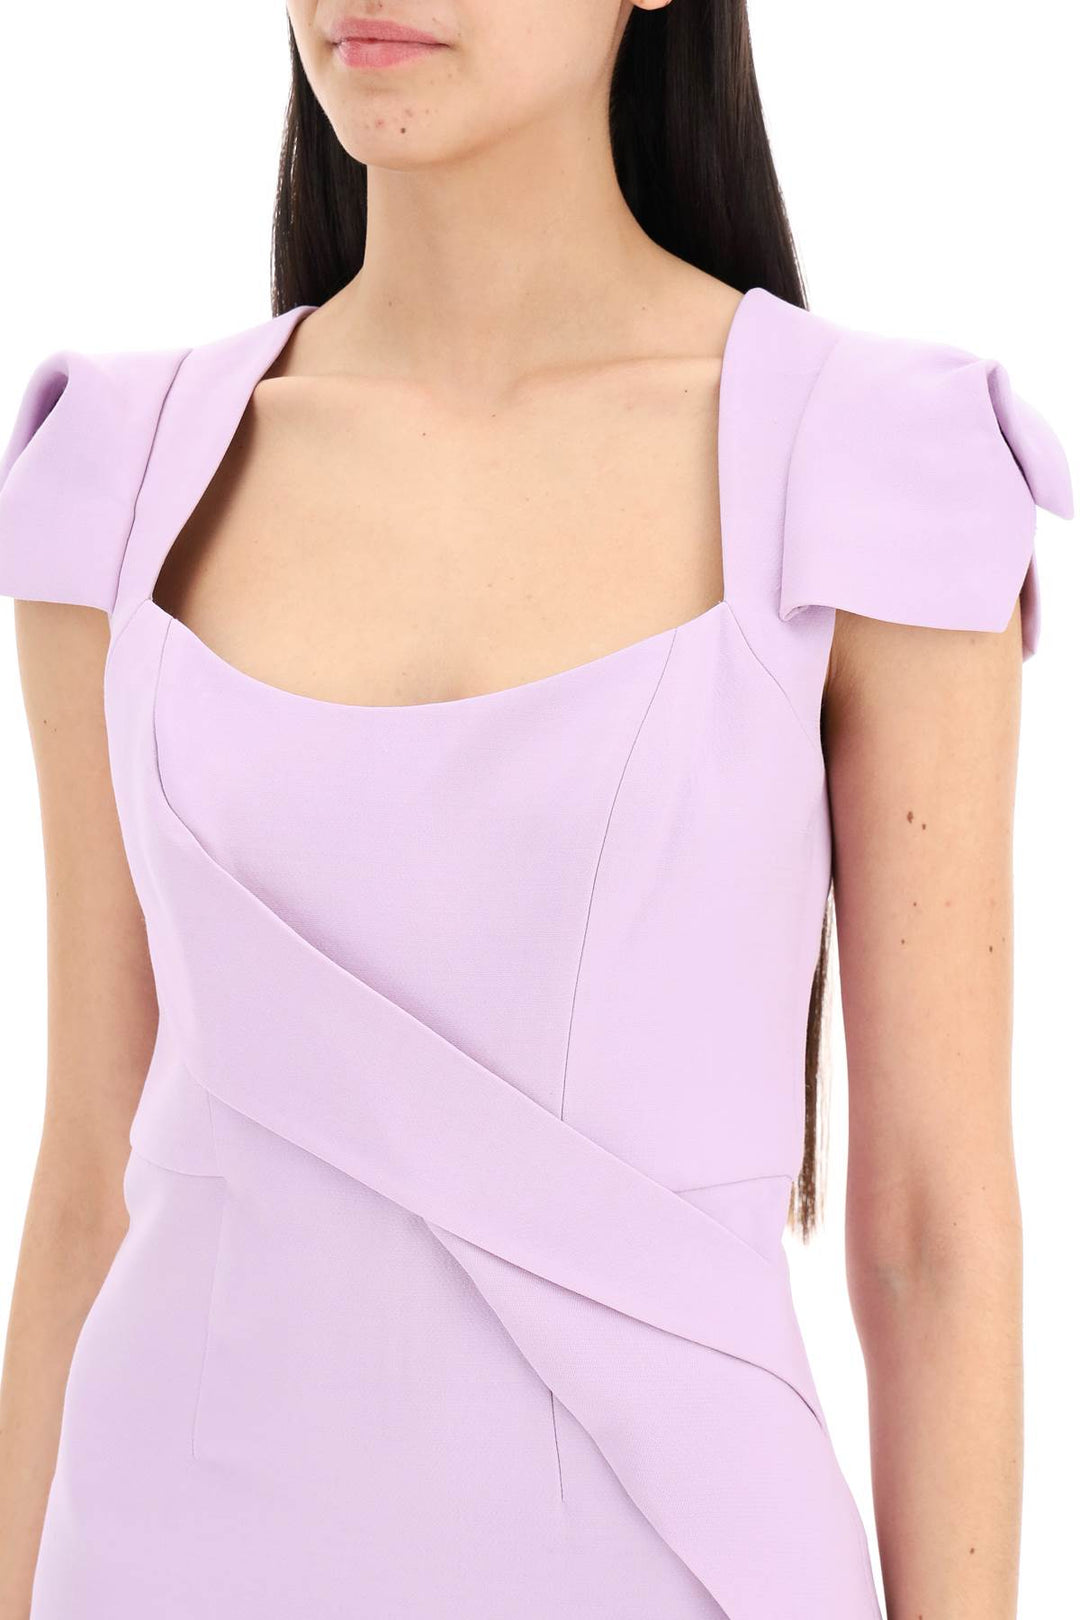 Roland Mouret Midi Dress With Draped Detailing   Pink